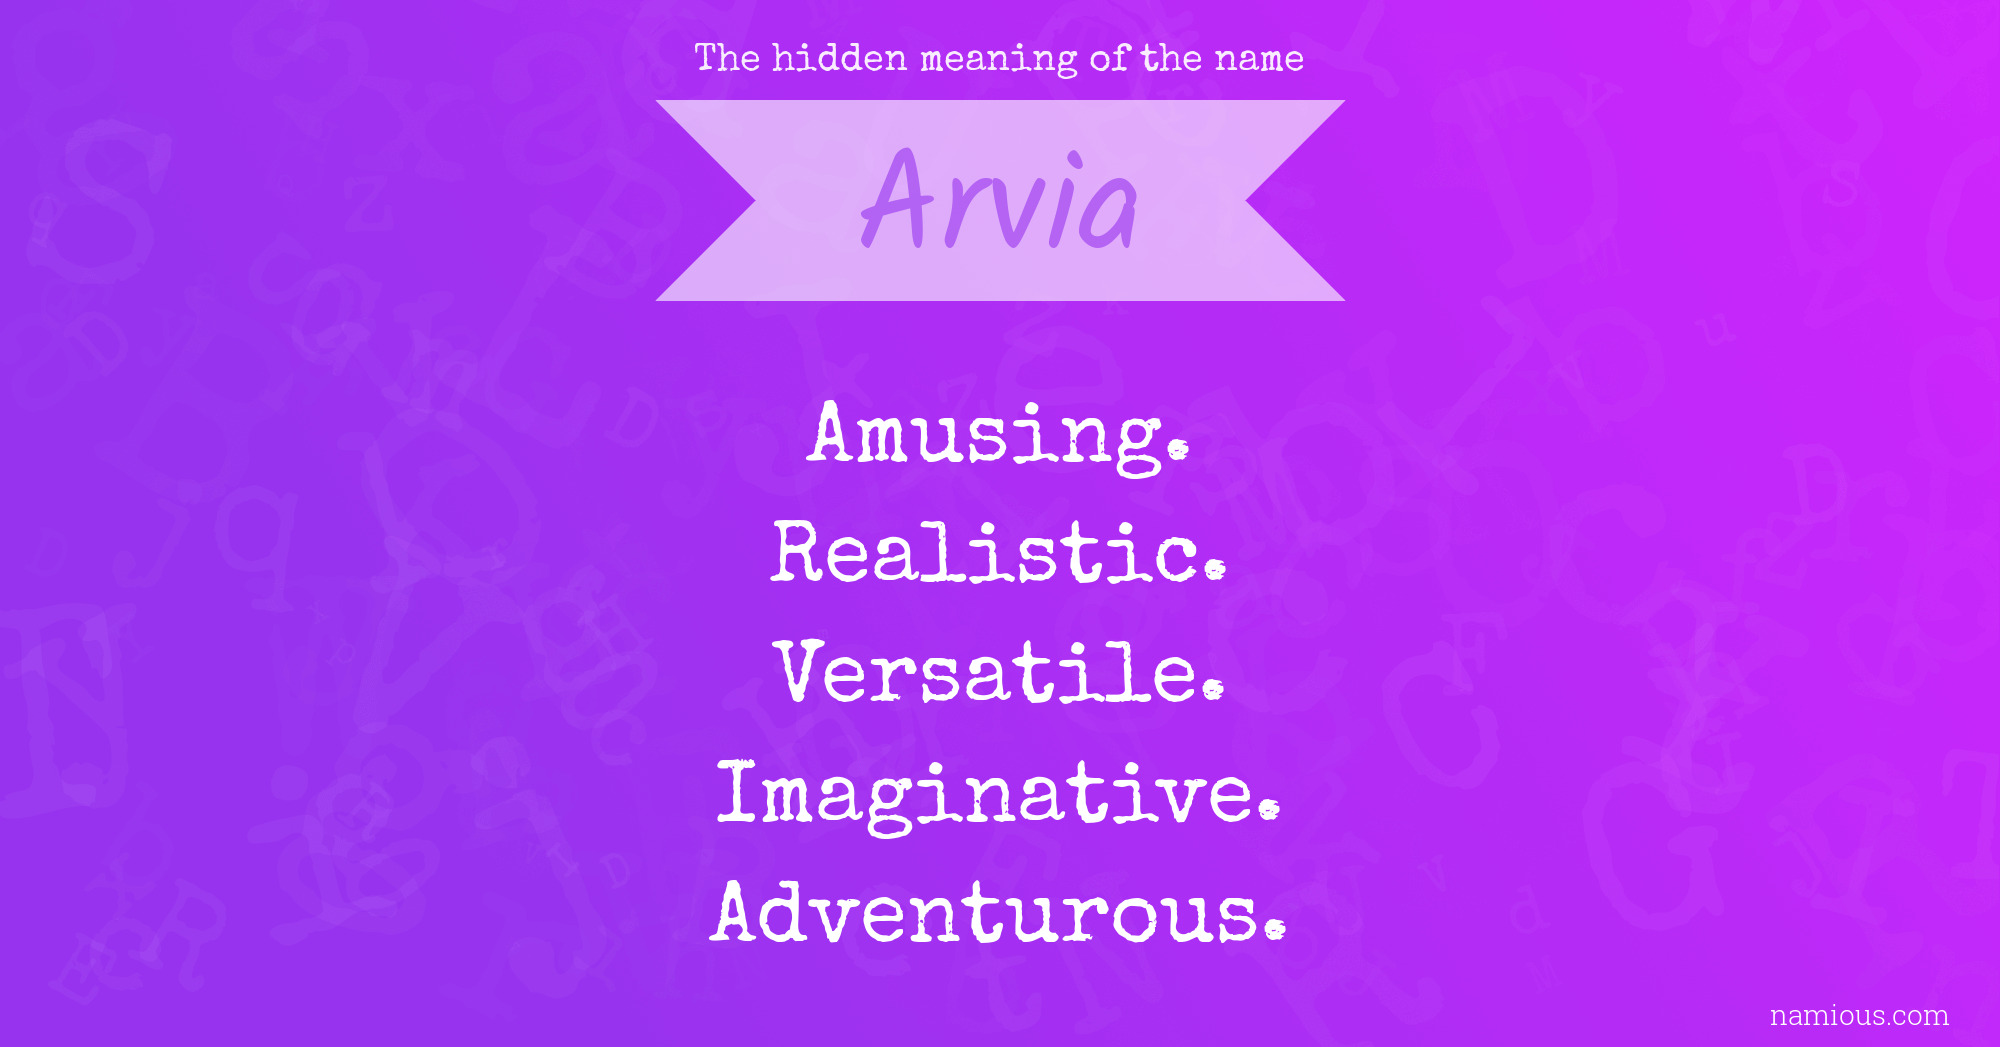 The hidden meaning of the name Arvia